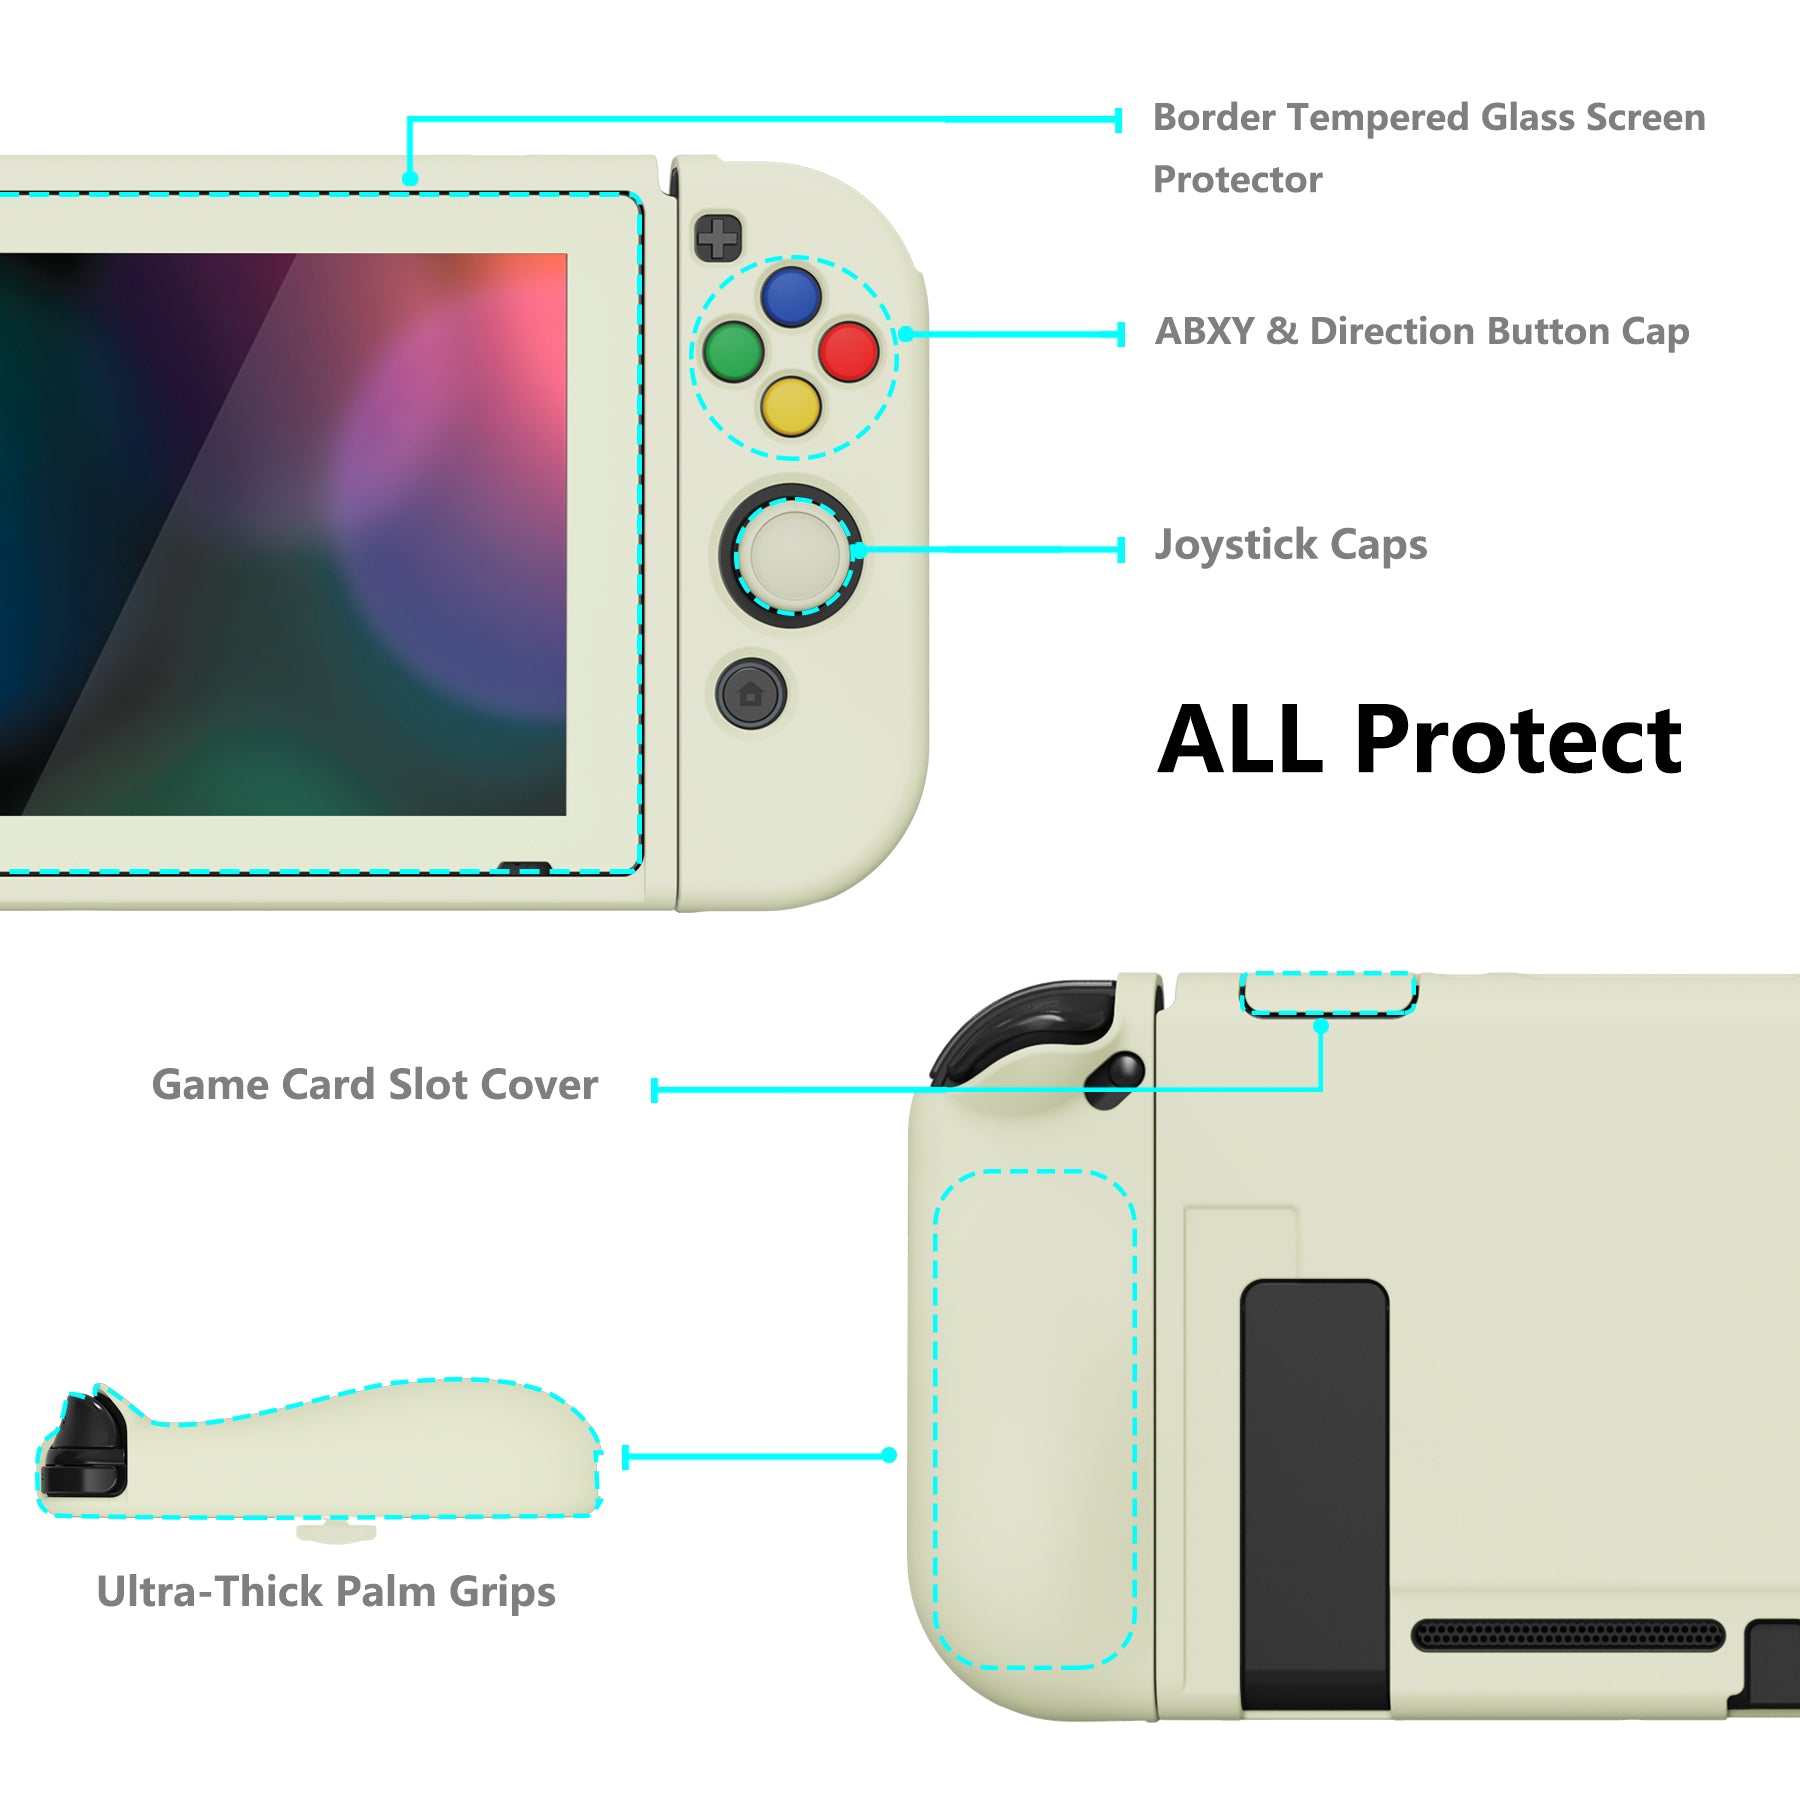 PlayVital ZealProtect Soft Protective Case for Nintendo Switch, Flexible Cover for Switch with Tempered Glass Screen Protector & Thumb Grips & ABXY Direction Button Caps - Antique Yellow - RNSYM5005 playvital